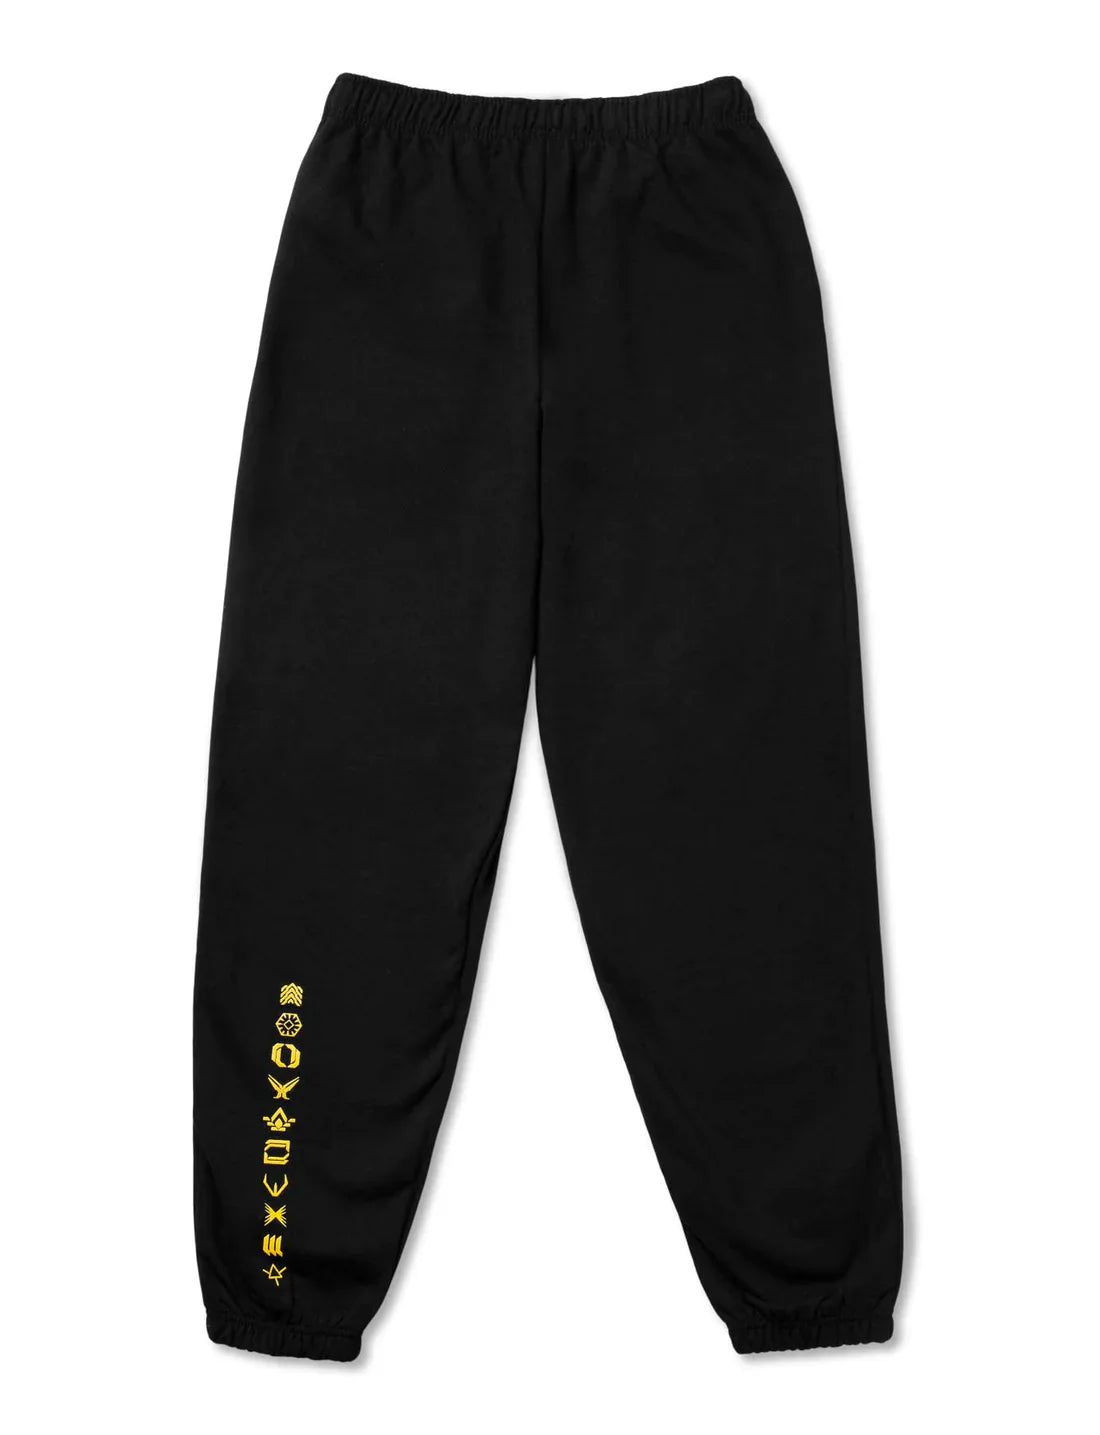 Black Alan Walker themed sweatpants with Walkerverse text and iconography down the right leg.